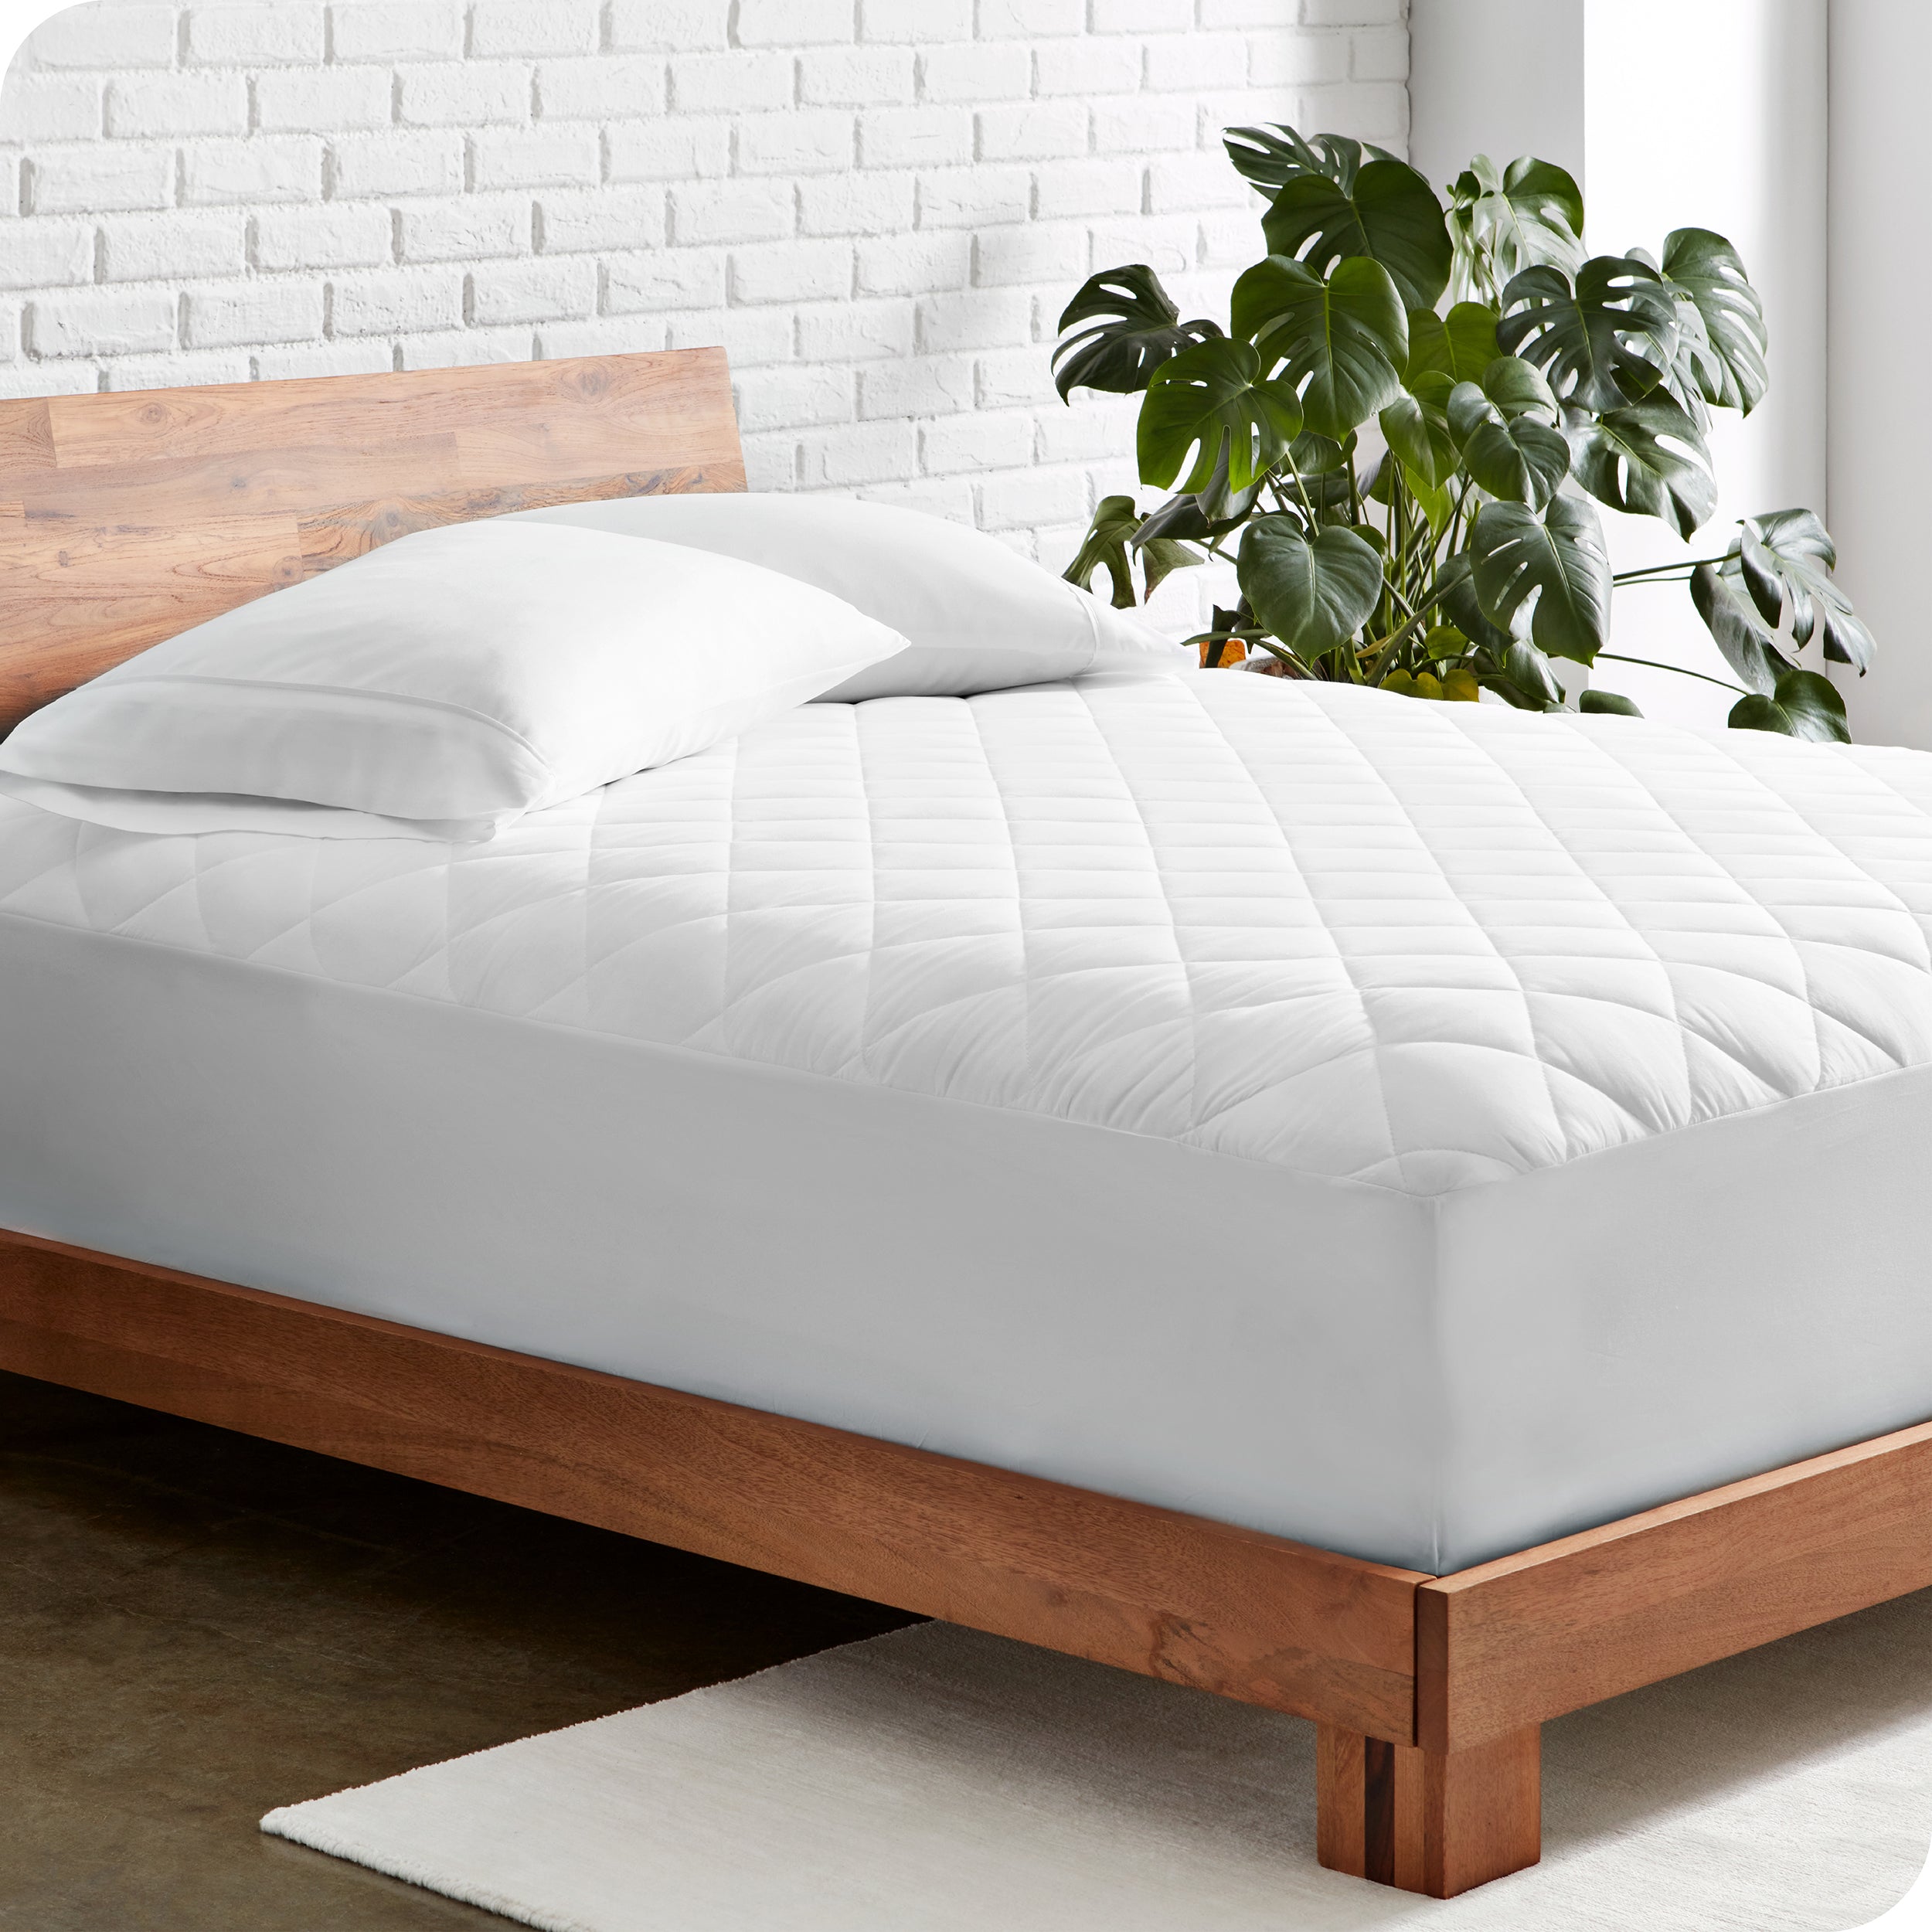 https://cdn.shopify.com/s/files/1/0474/5042/3448/products/quilted-mattress-pad-bare-home-1.jpg?v=1660324476